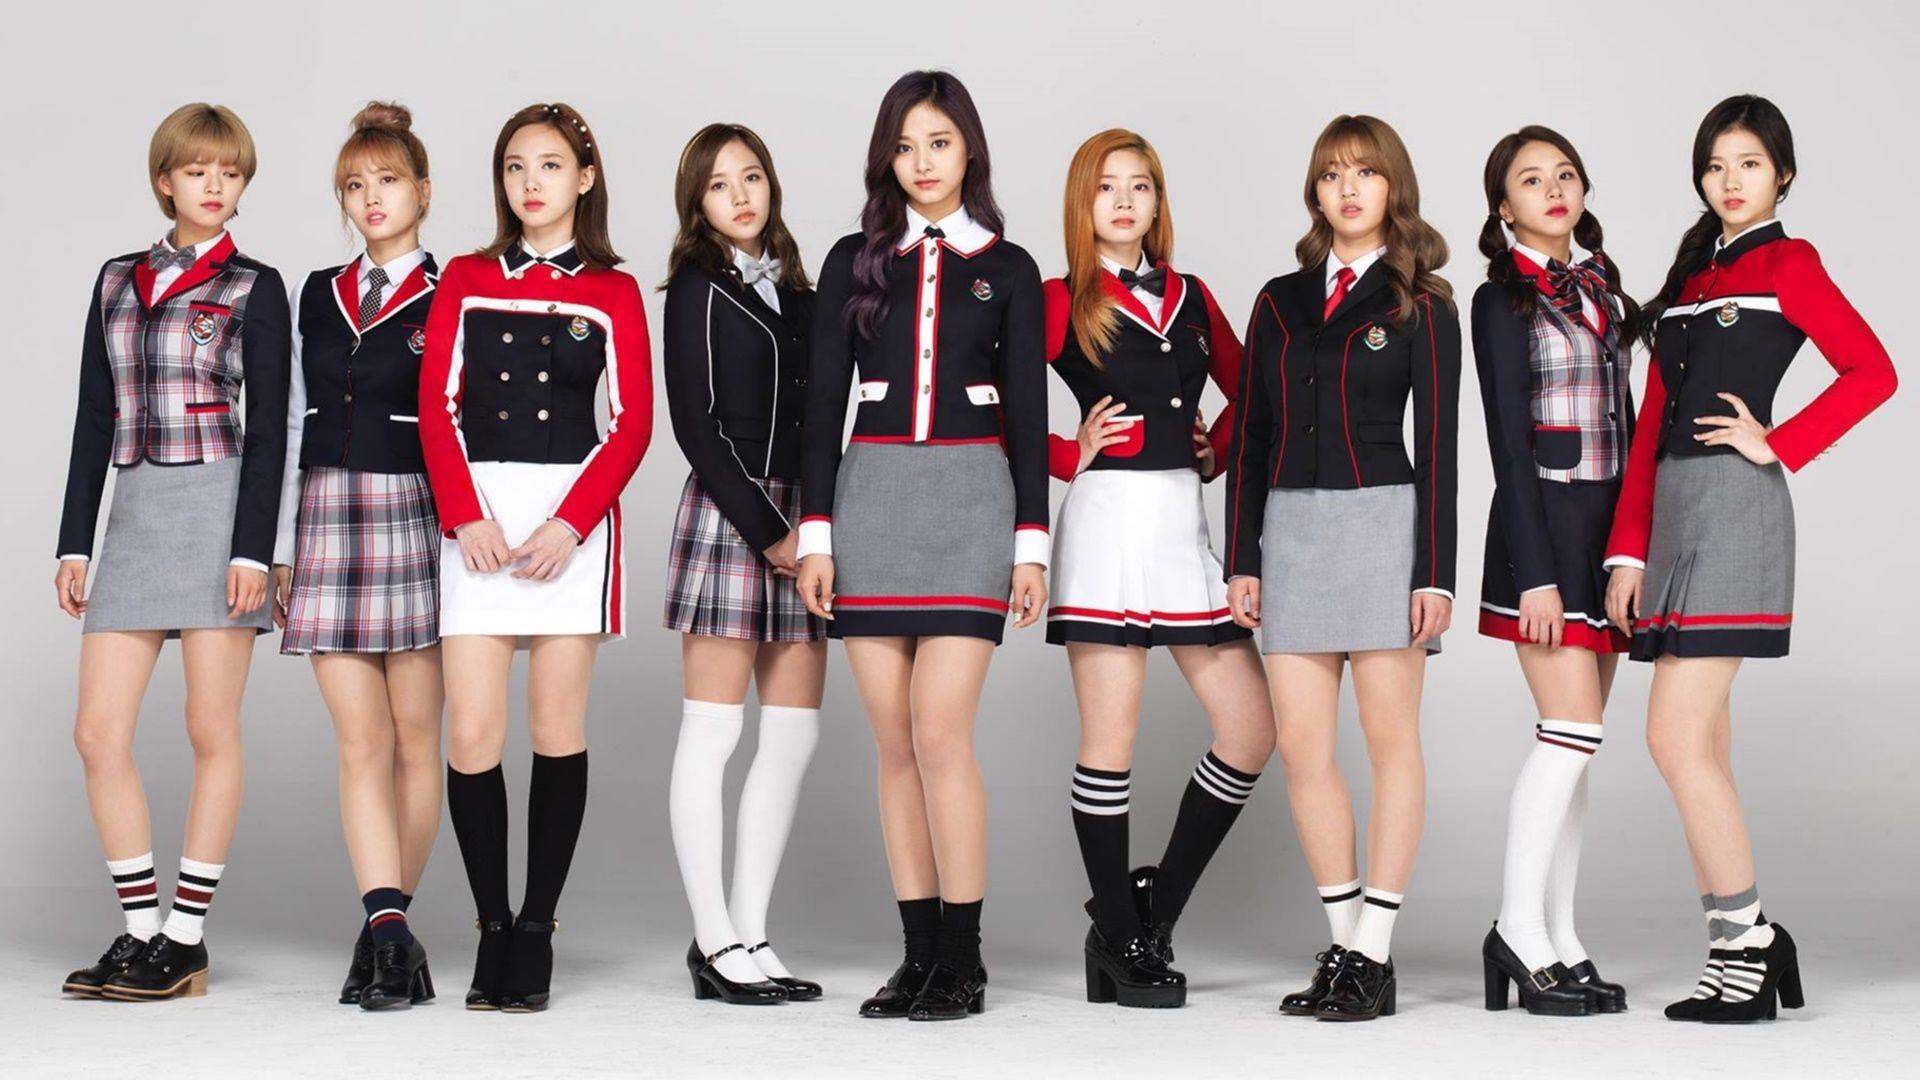 Twice 19x1080 Wallpapers Top Free Twice 19x1080 Backgrounds Wallpaperaccess